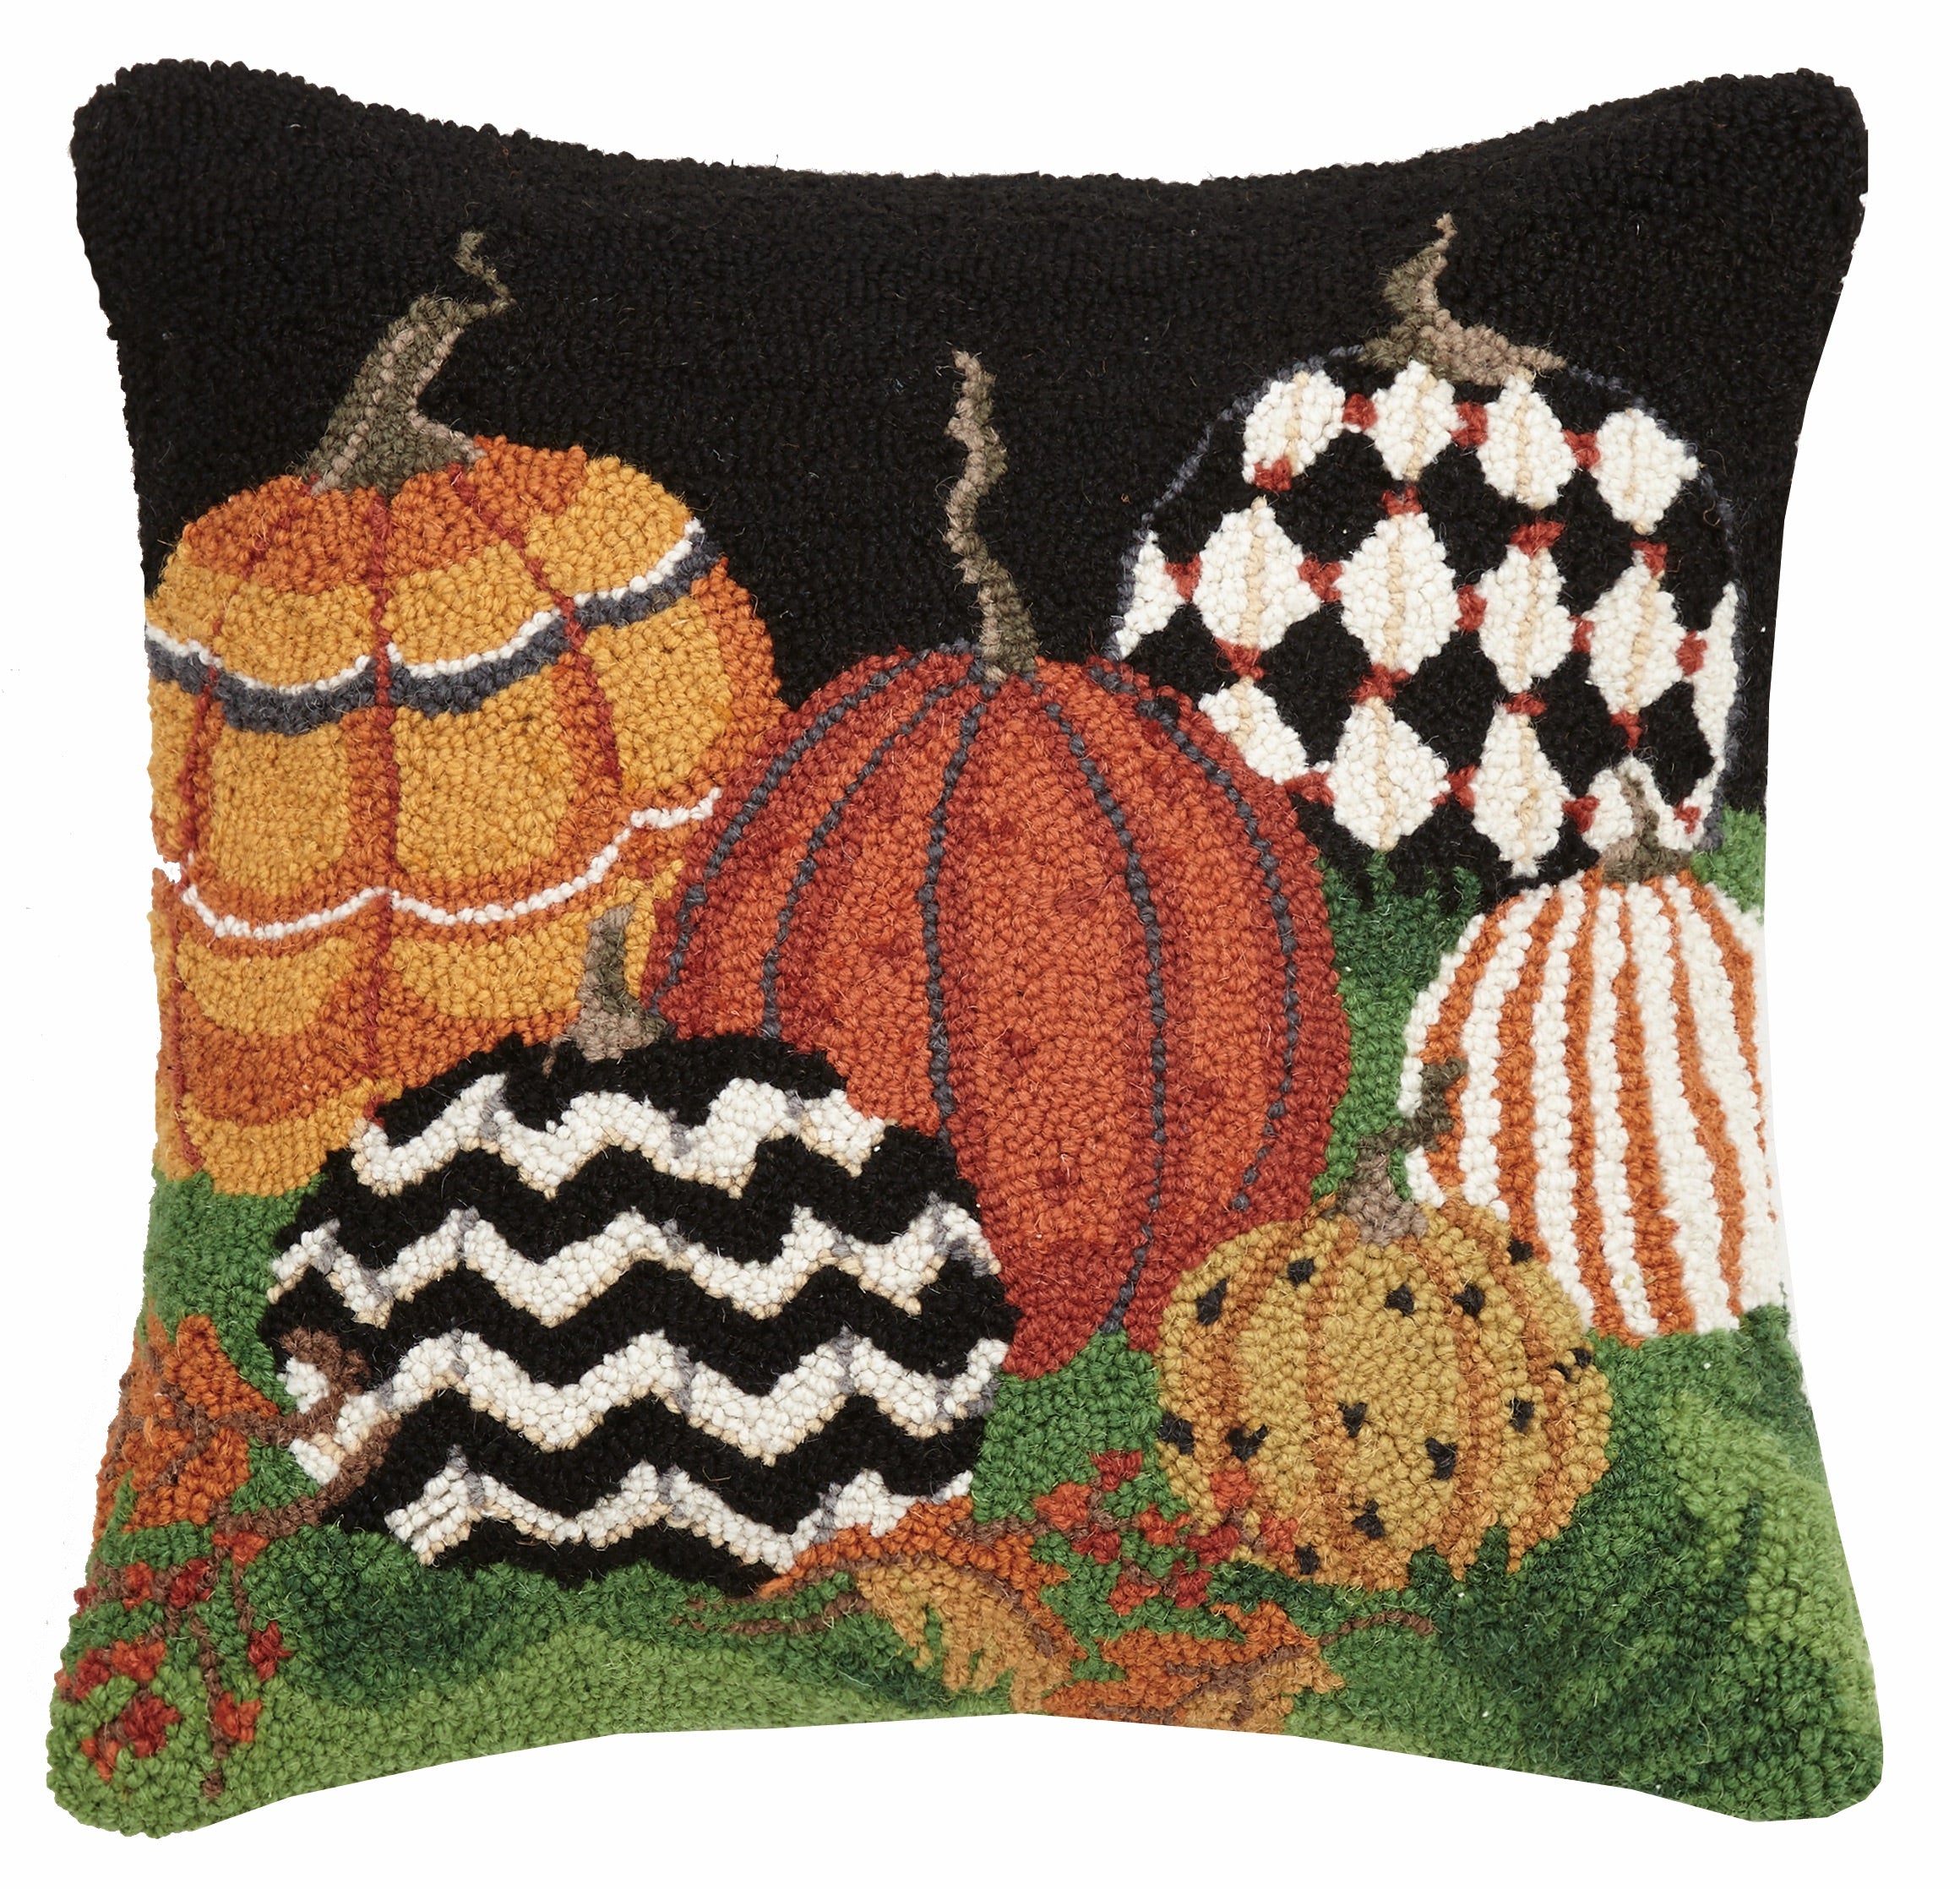 Hand-Hooked Wool Fall Simple Leaves Pillow 16